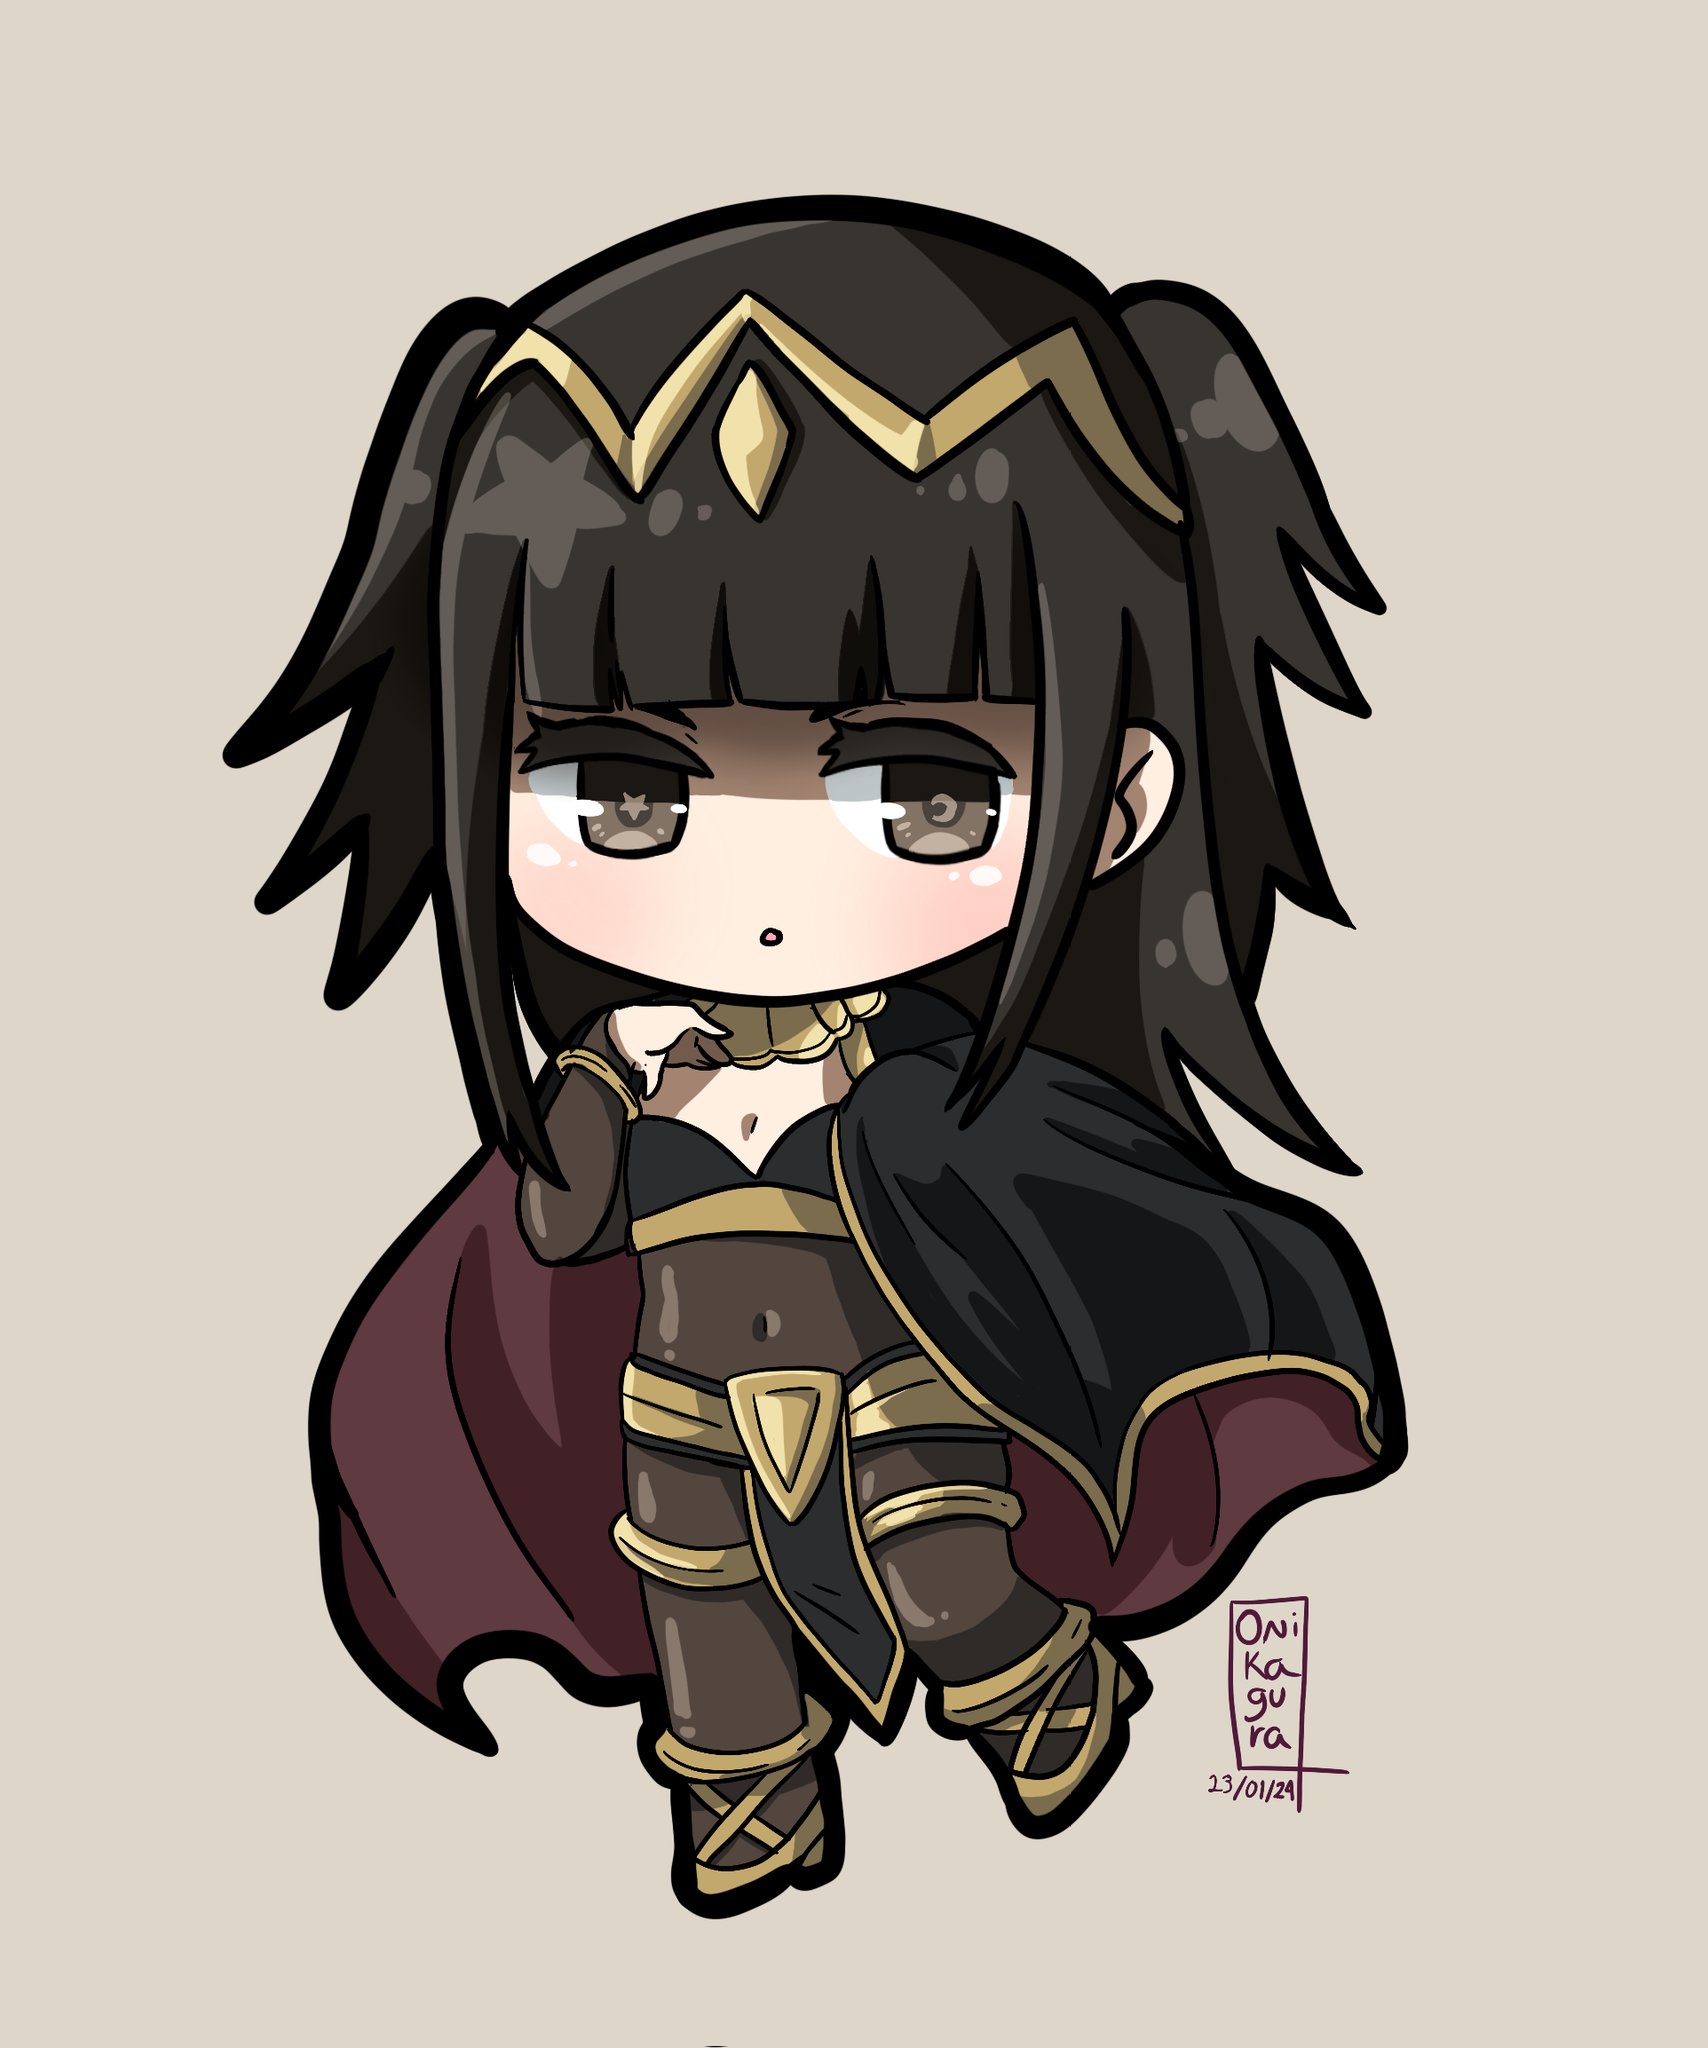 OniKagura ♡Working on my New Year goals♡ on X: Fighting my art block by  drawing my CYL votes: Day 4: Tharja #CYL #FEHeroes #FEH #ファイアーエムブレム  t.corLqBec48u3  X